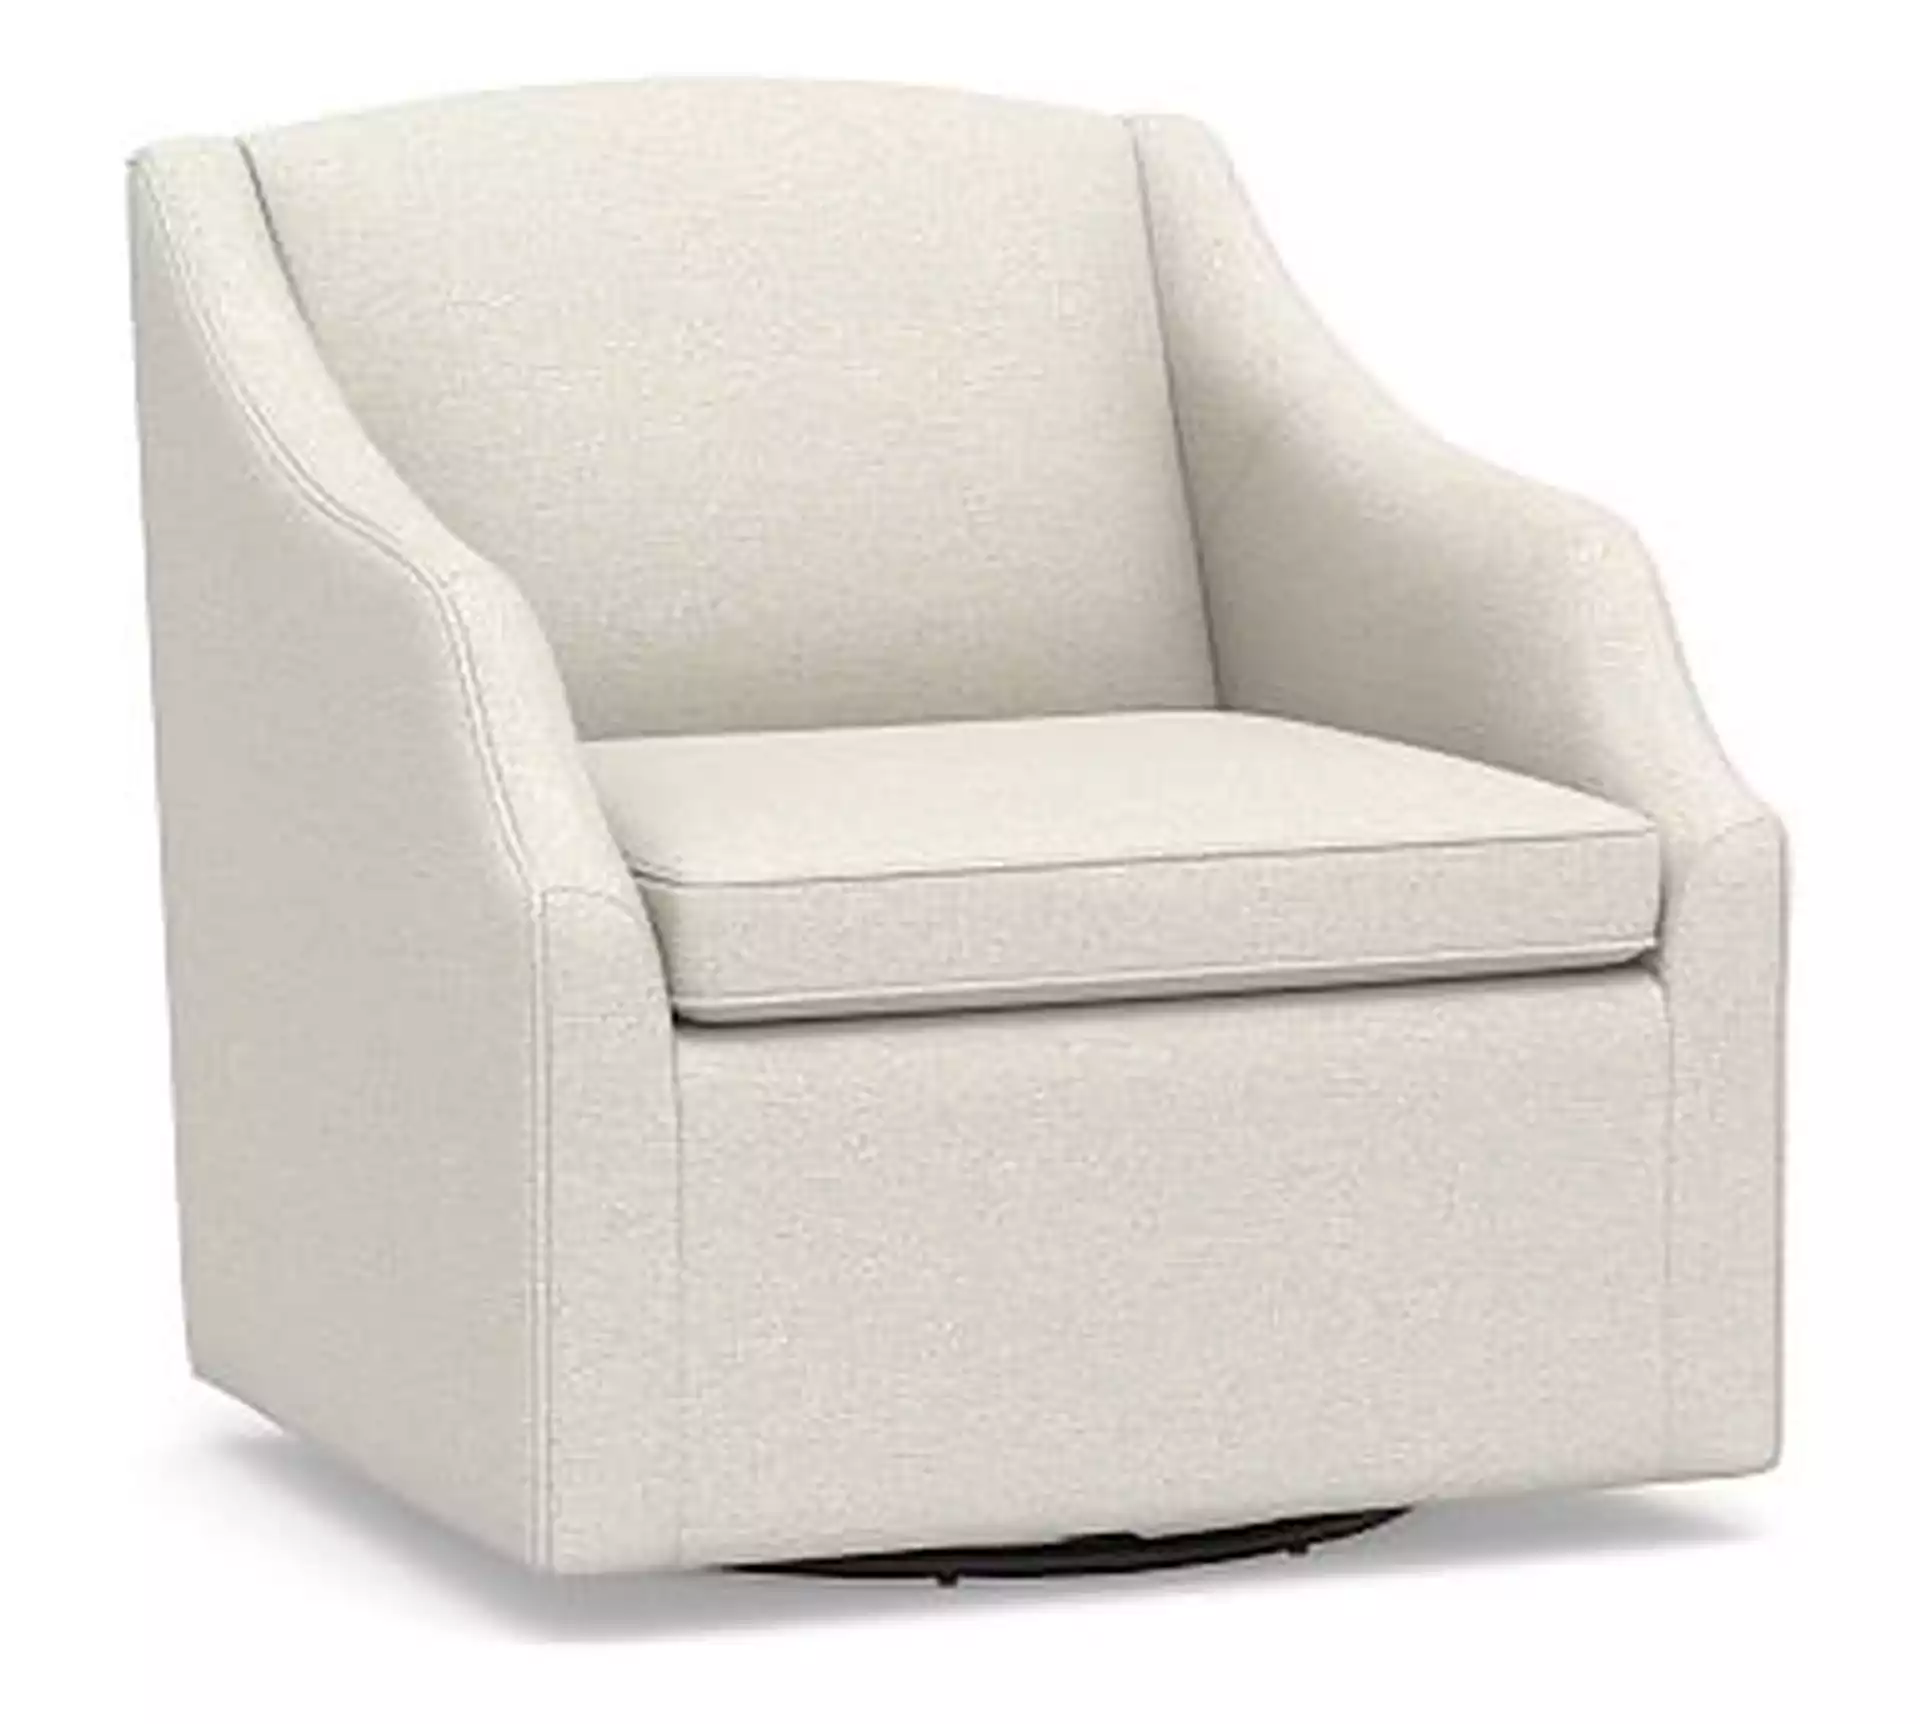 SoMa Emma Upholstered Swivel Armchair, Polyester Wrapped Cushions, Performance Boucle Oatmeal